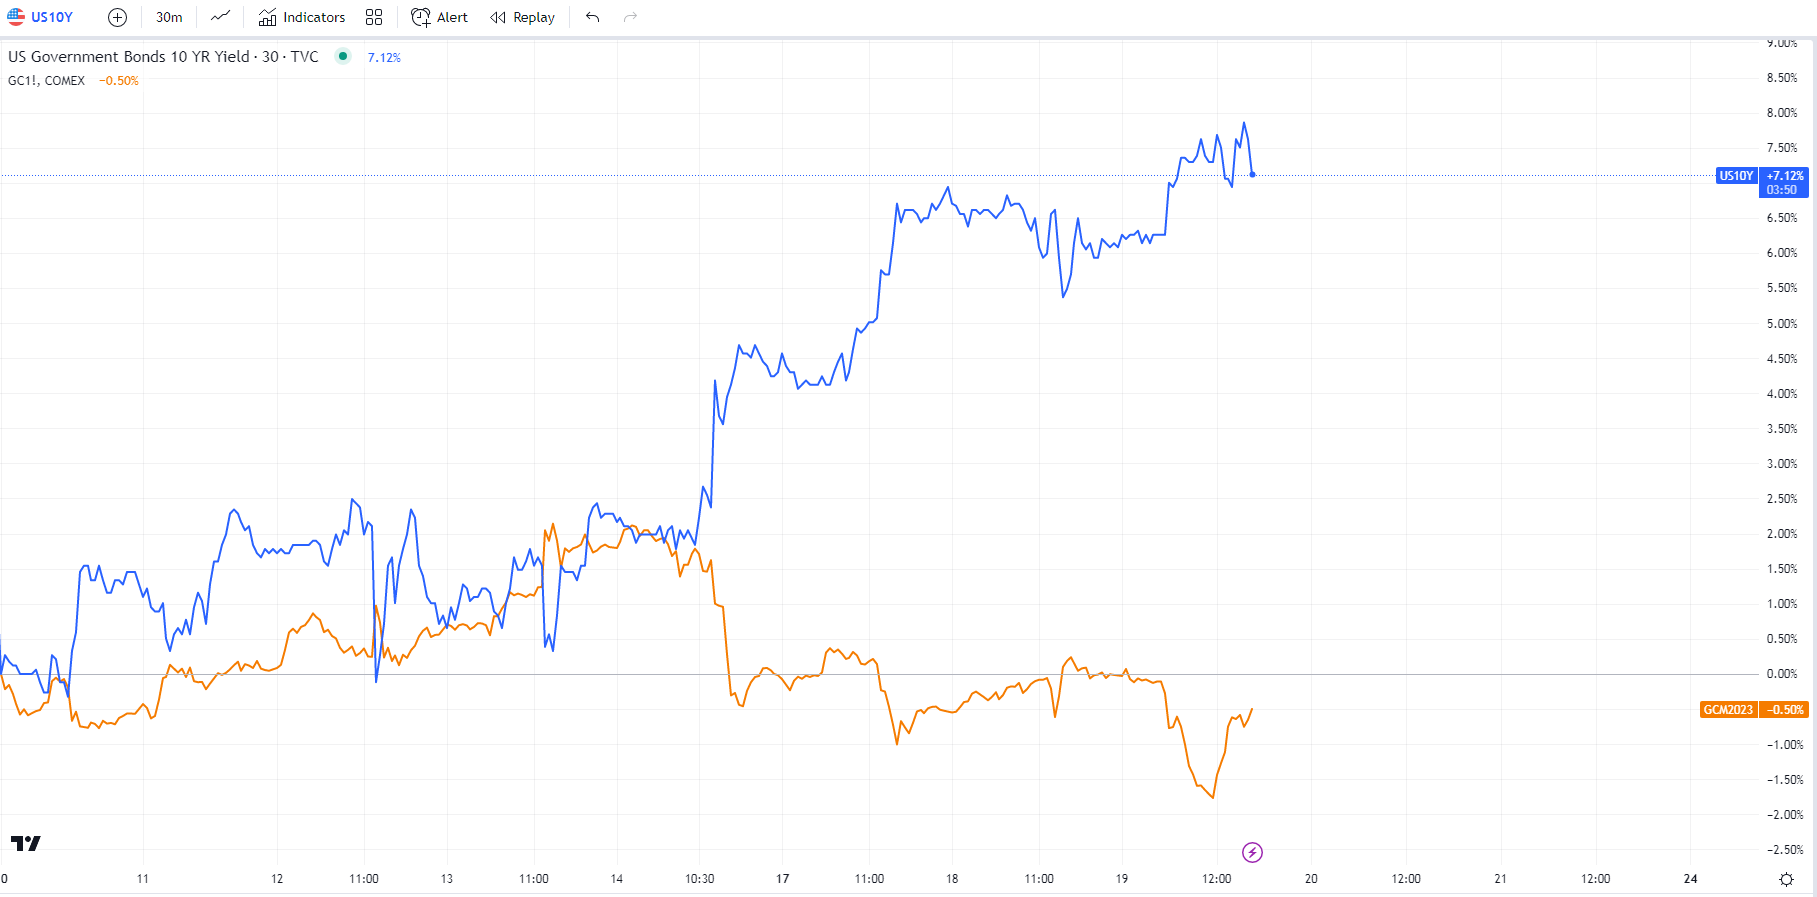 Gold futures vs. US10 year bonds yield. Source: Author's analysis